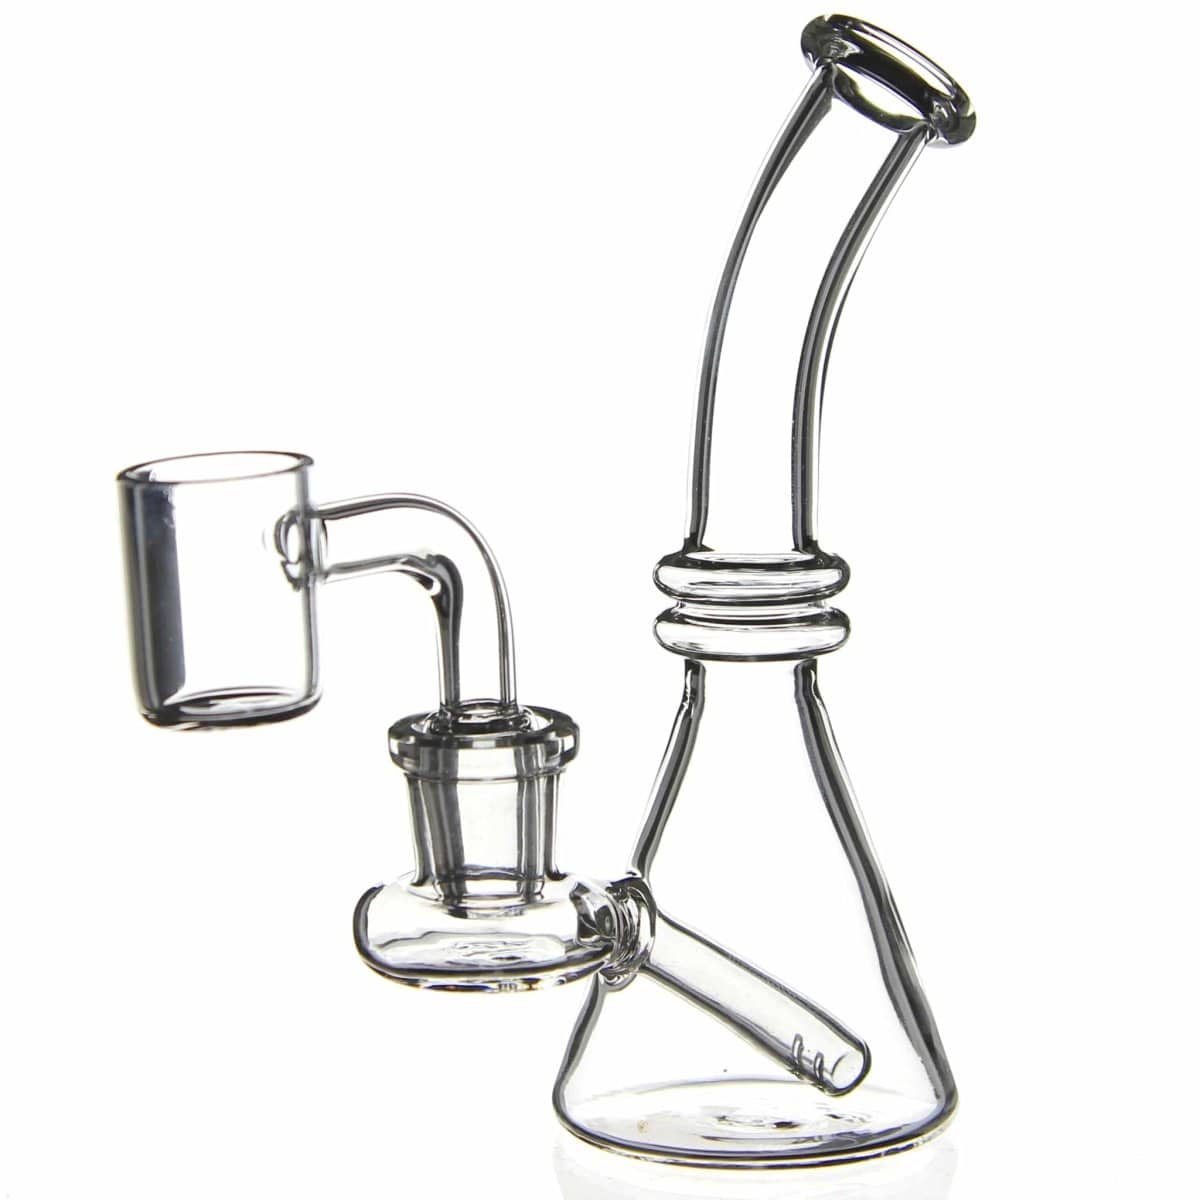 Quartz Dab Rigs and Bangers for Sale